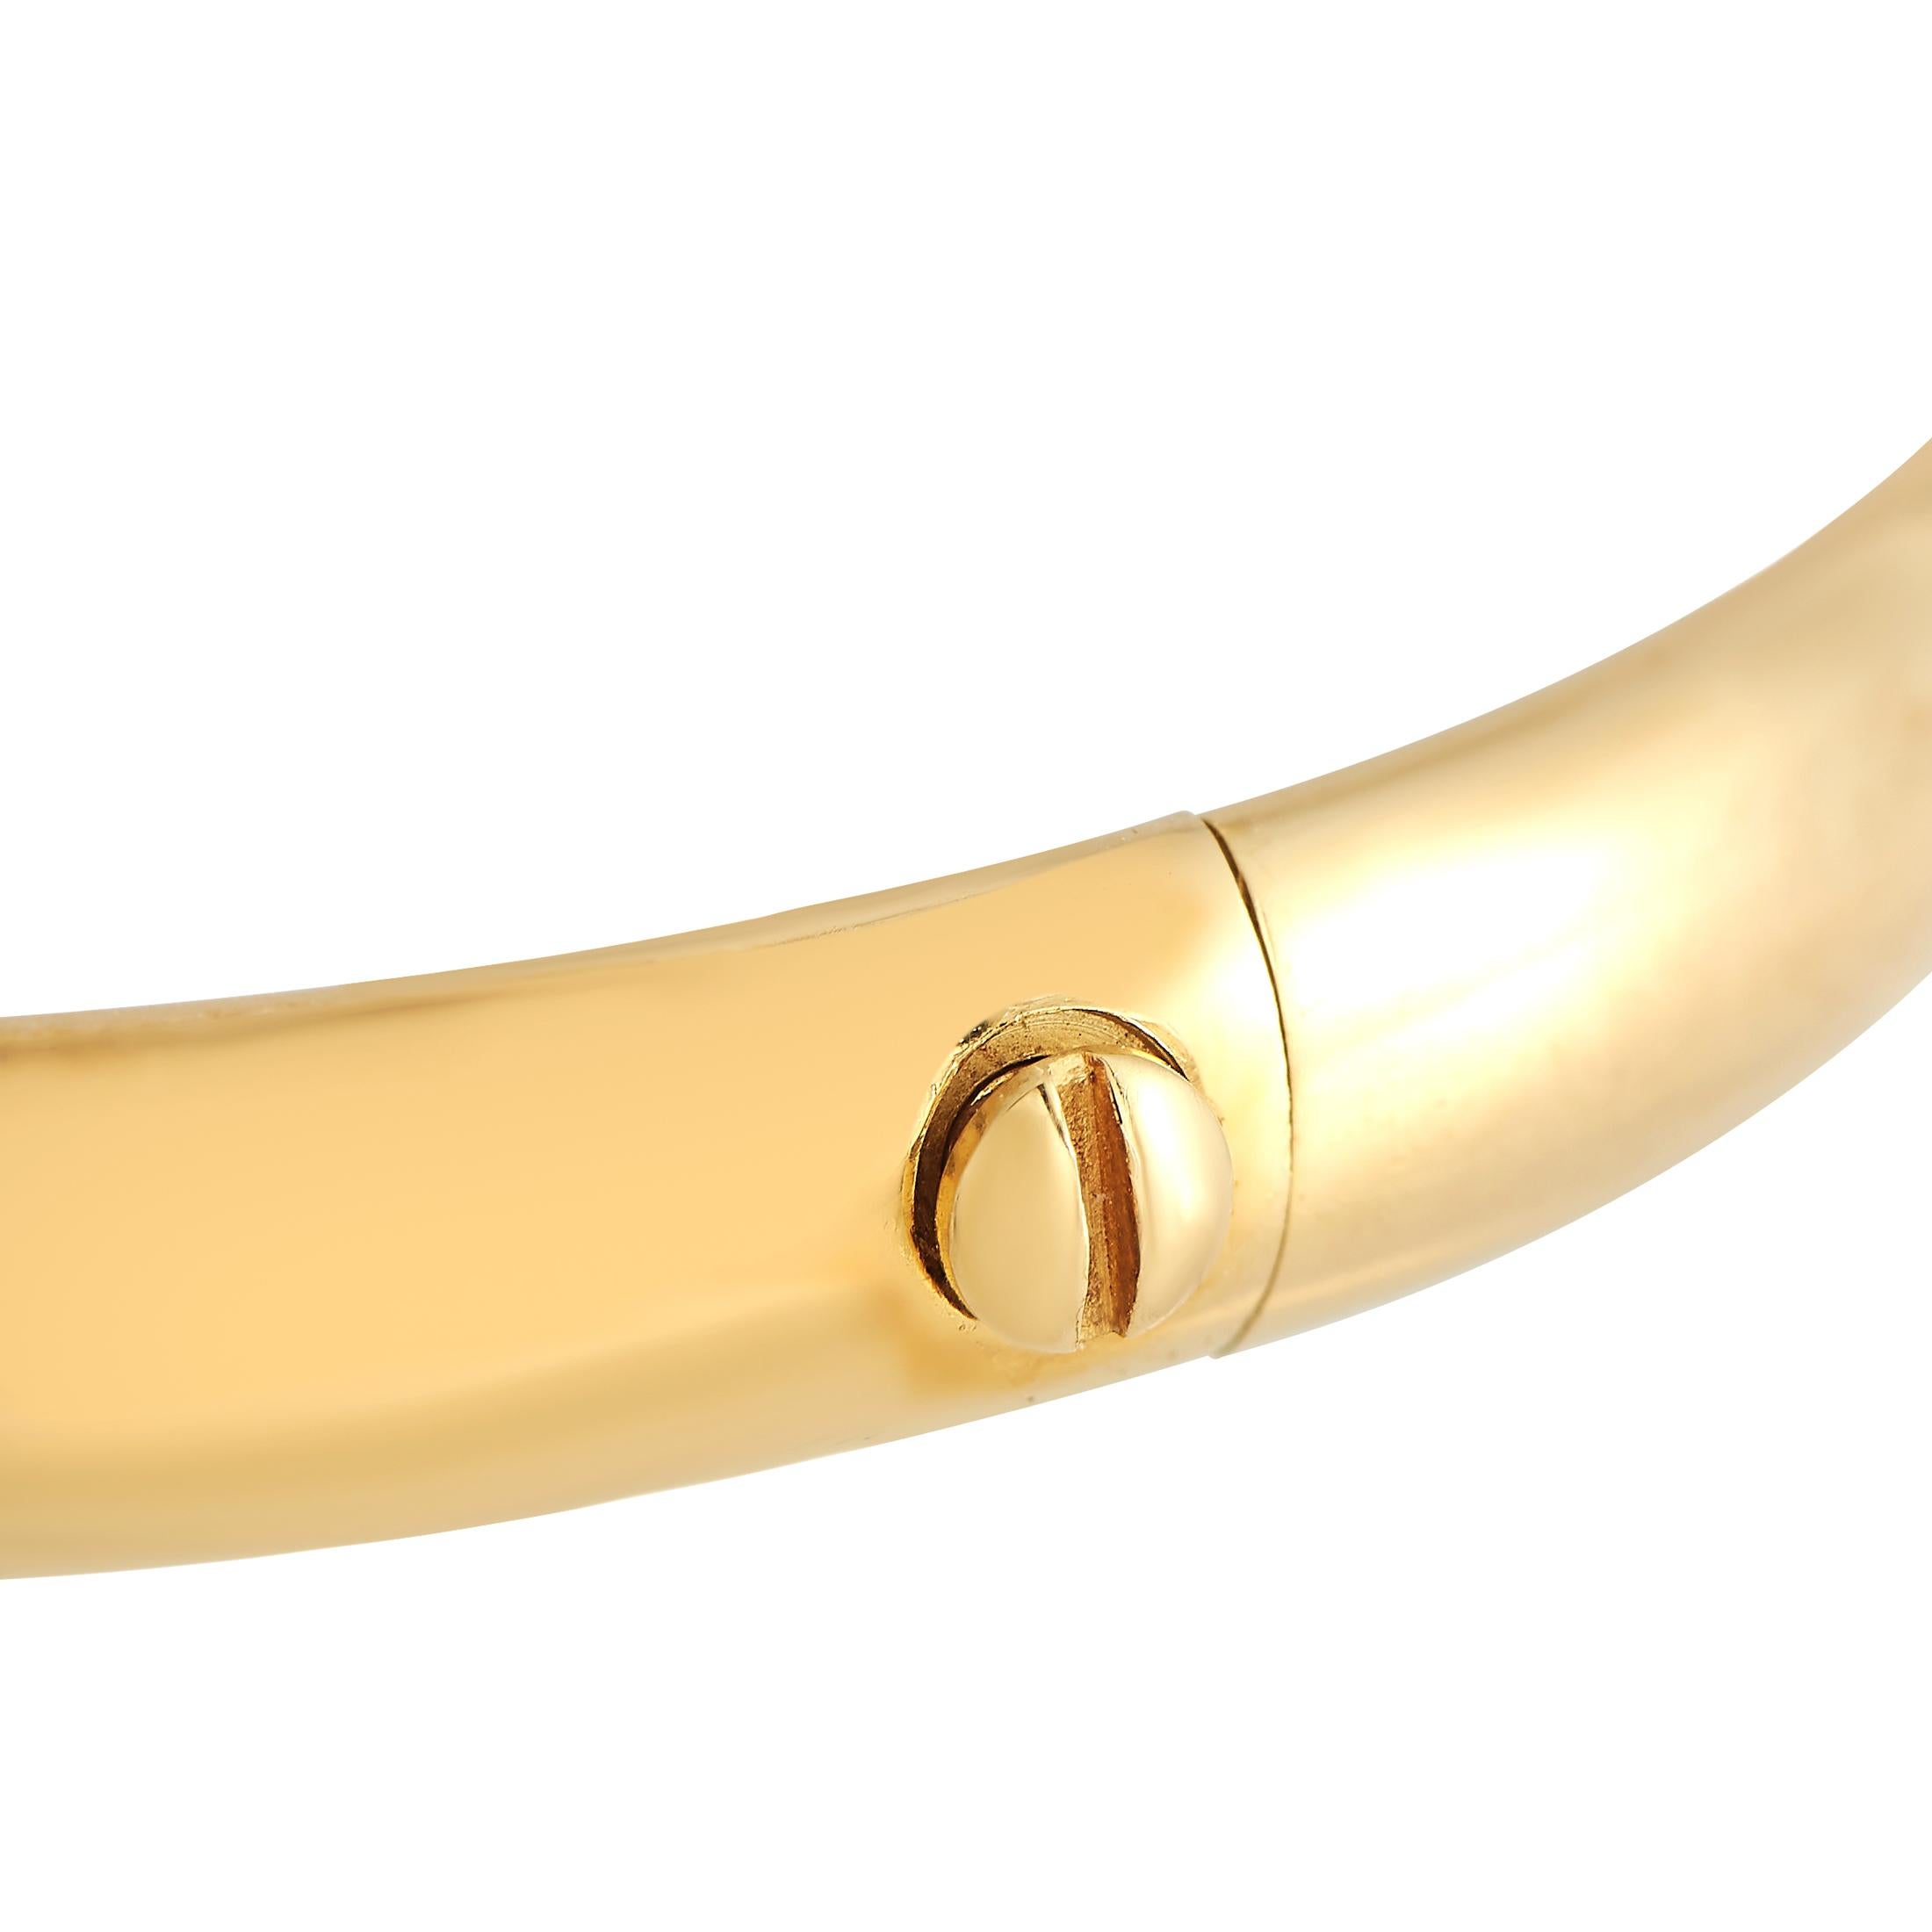 Of quiet elegance, this Cartier bangle is perfect for layering, mixing and matching. It features a rigid band in solid 18K yellow gold, detailed with cross-over fluted collars in yellow gold, rose gold, and white gold.This Cartier 18K Yellow, White